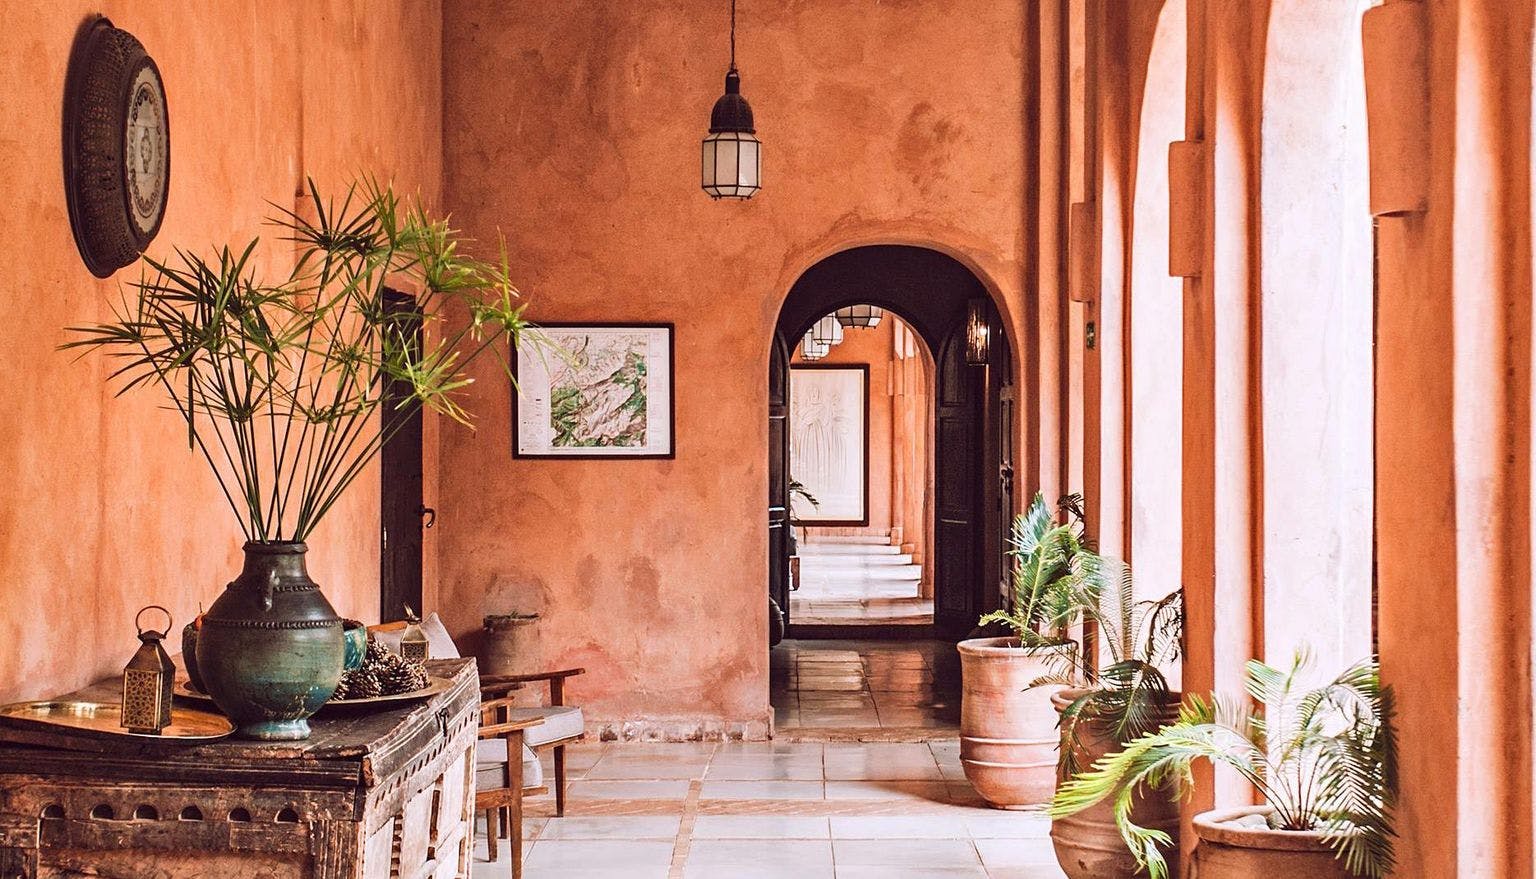 The interior of a property with archways, terracotta walls and plants